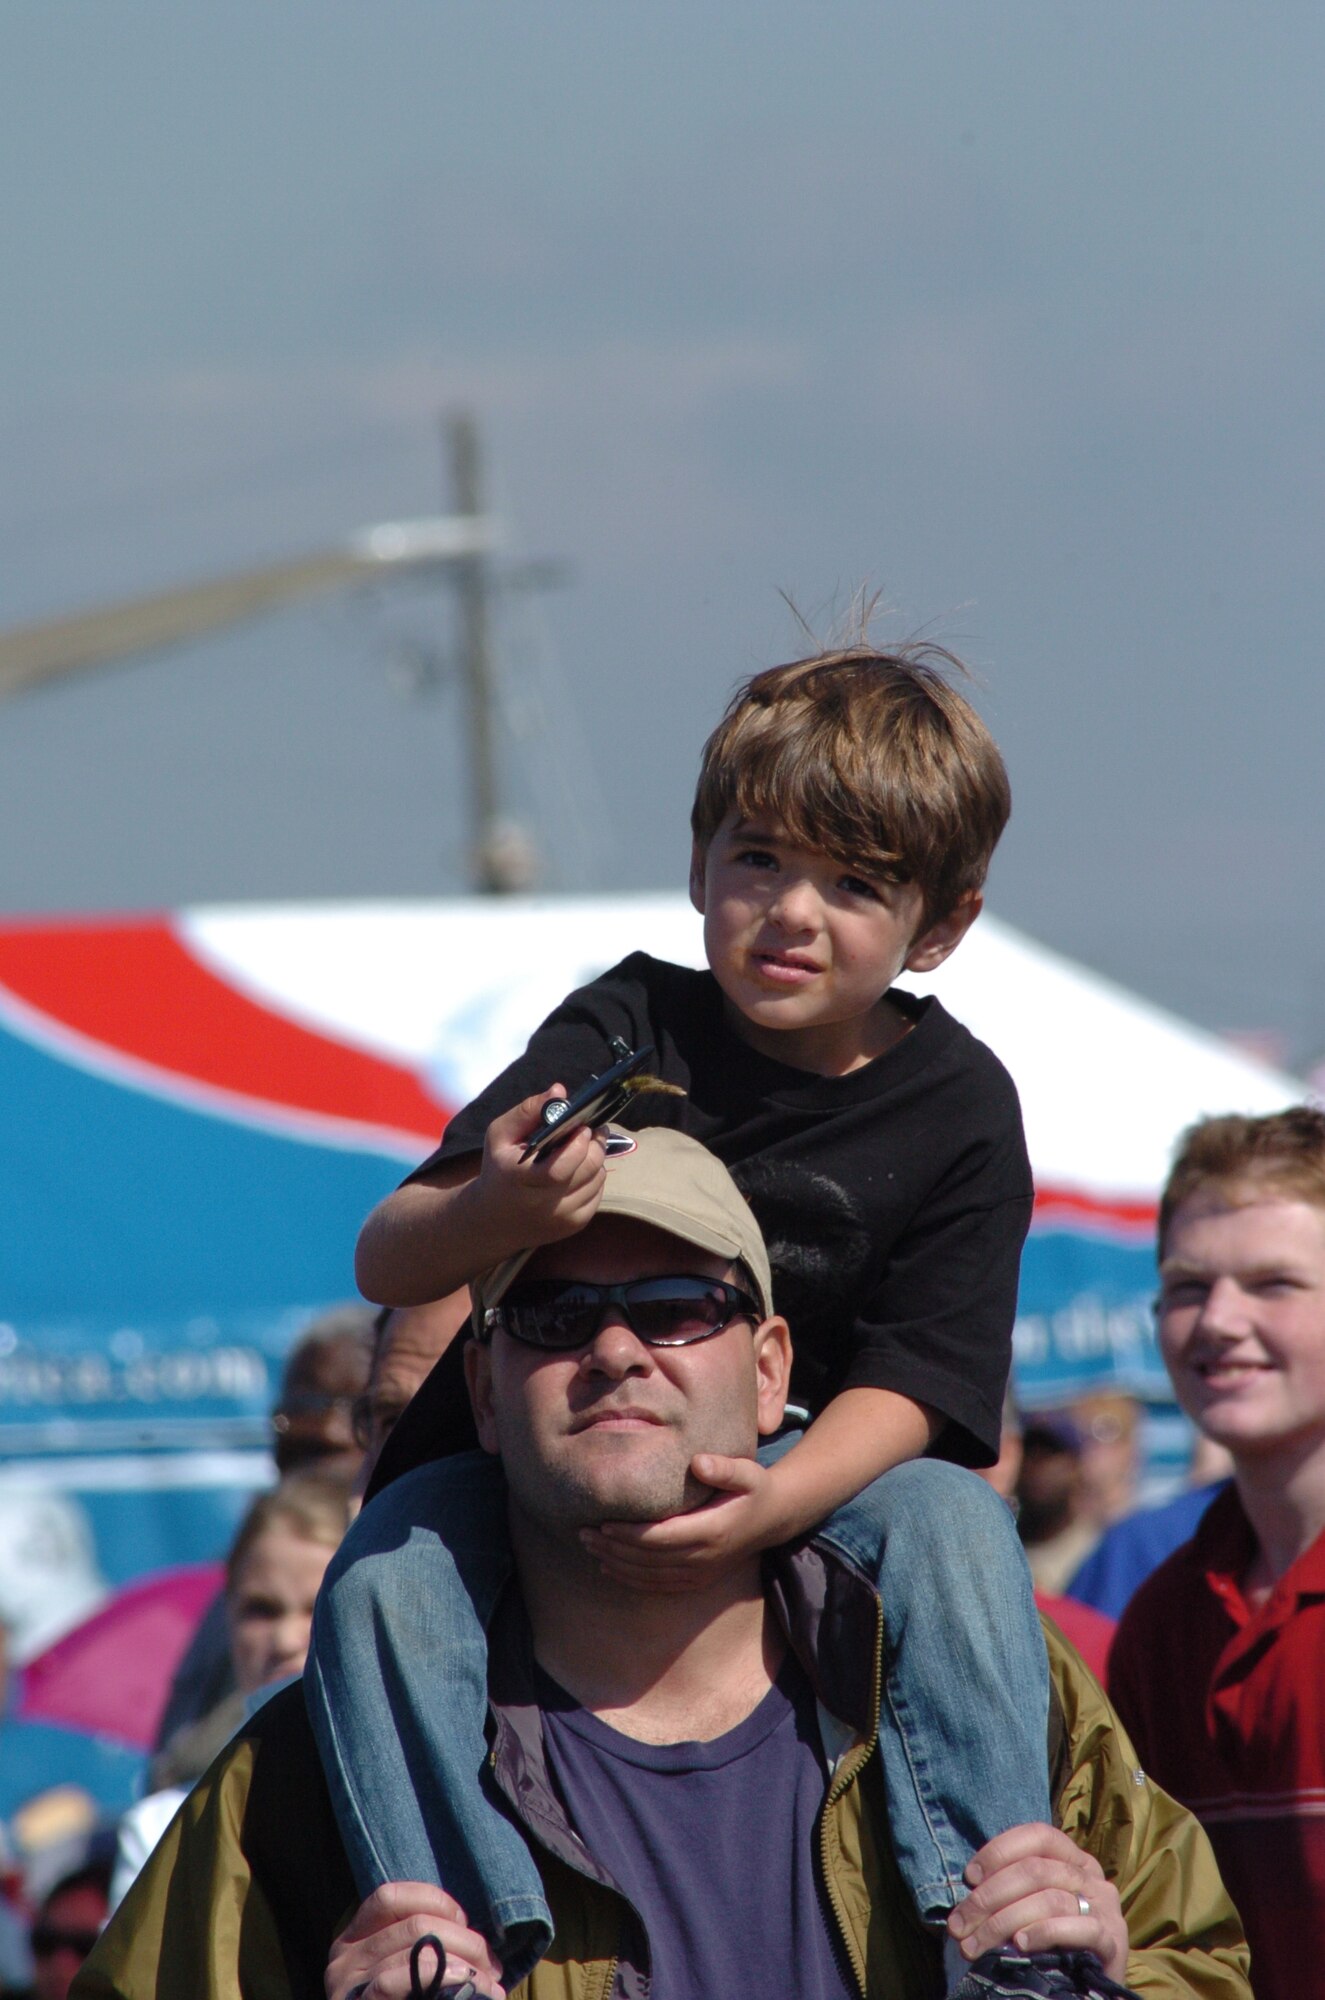 DOBBINS AIR RESERVE BASE, Ga. -- A young spectator gets a lift while watching the F-22 Raptor perform during the "Wings Over Marietta" air show here Oct. 18.  The air show features the world-renowned U.S. Air Force Thunderbirds who are the featured act each day. (U.S. Air Force photo/Master Sgt. Stan Coleman)